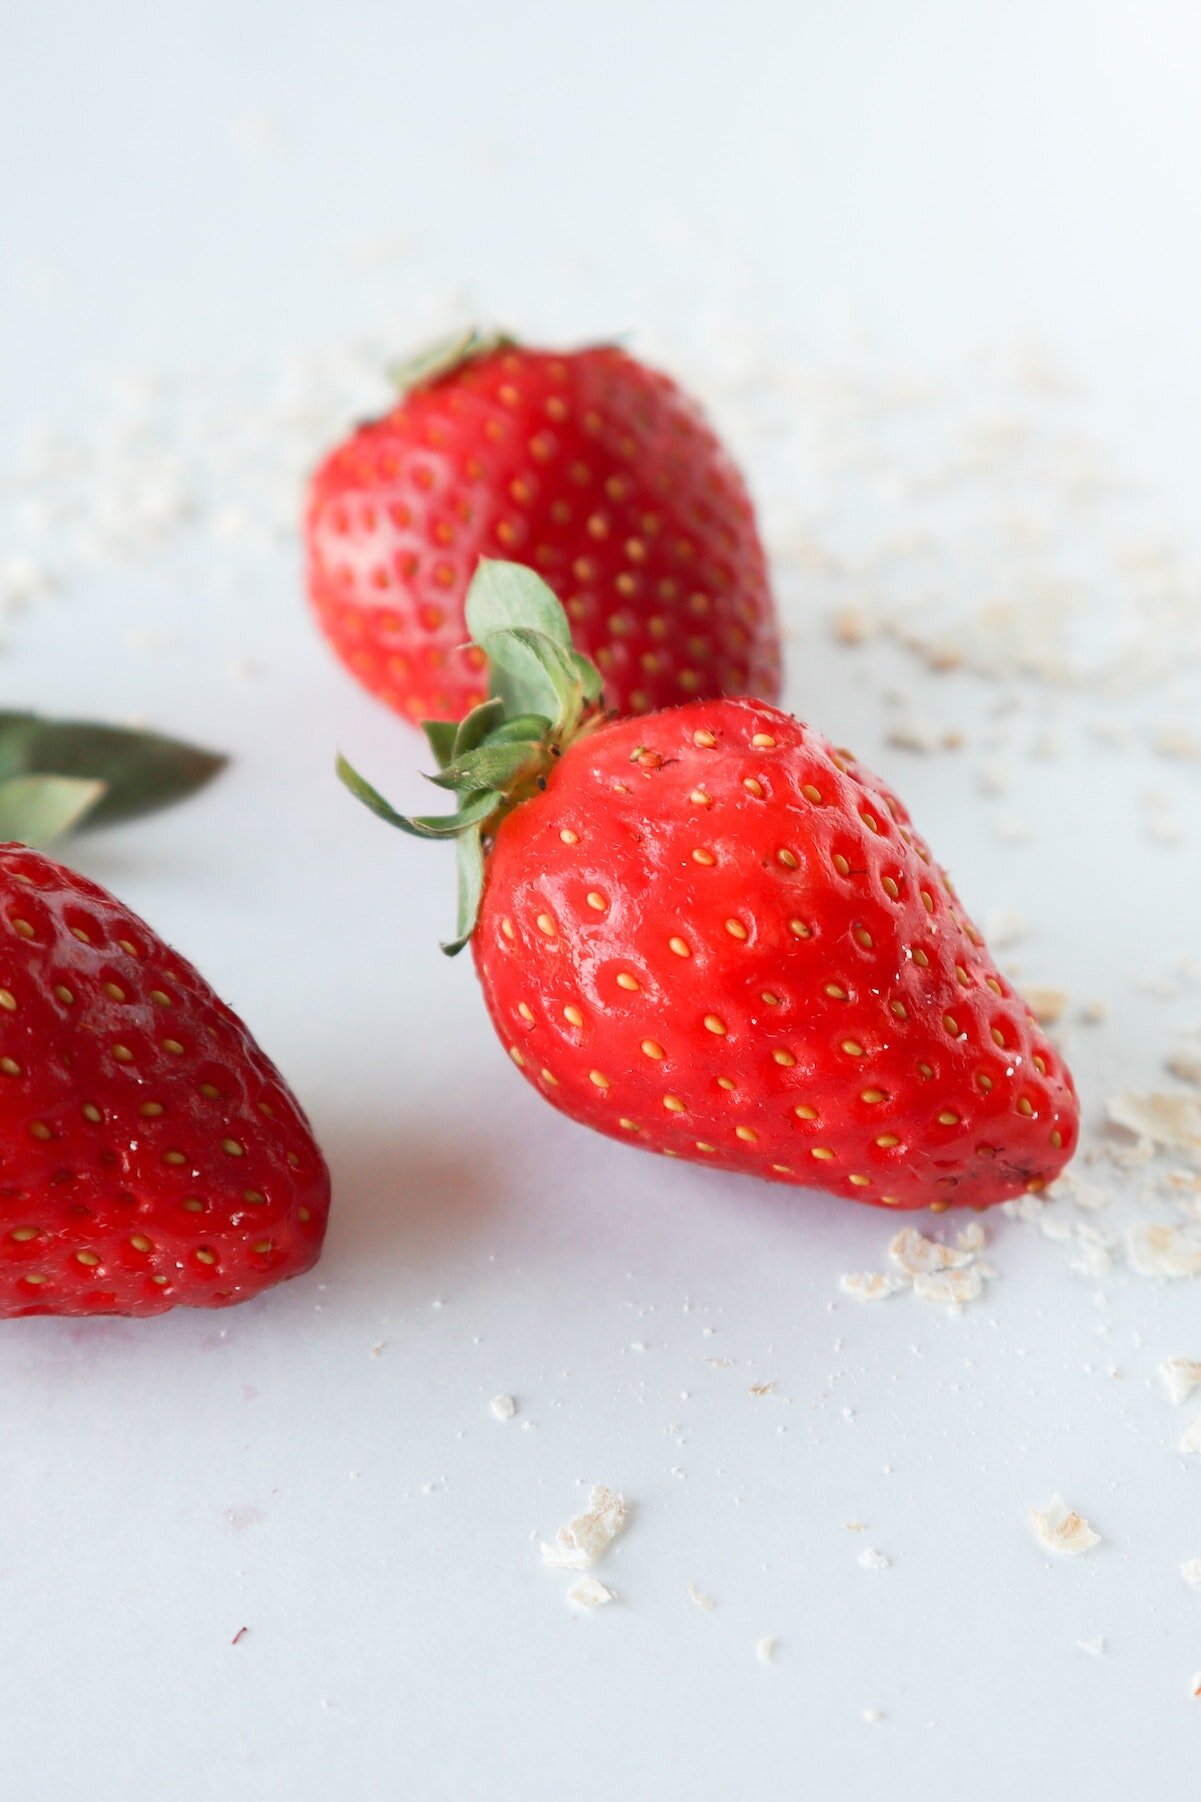 5 Ways To Make Oats Exciting - Strawberries.jpg